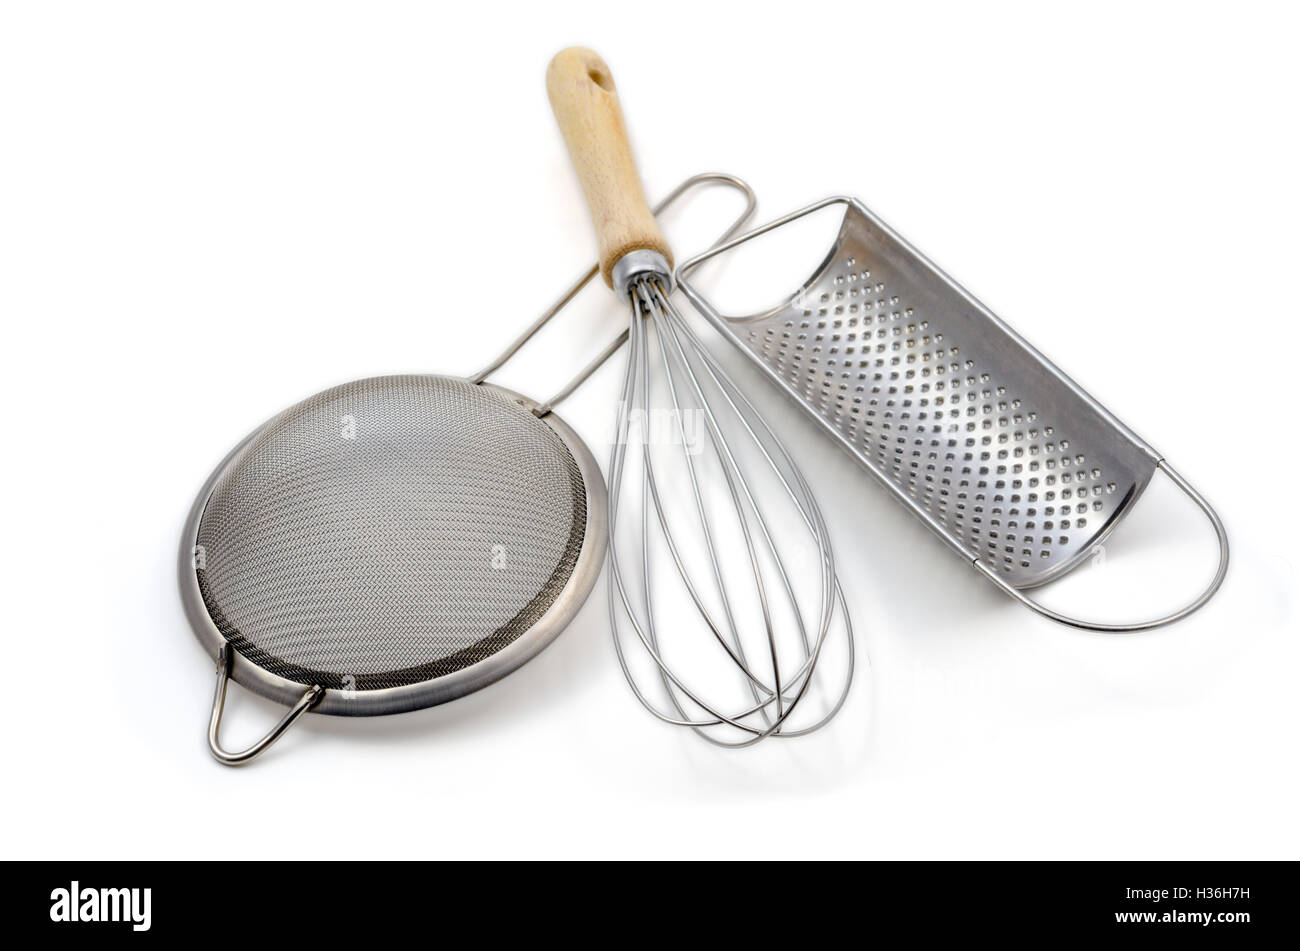 whisk, strainer and grater isolated over white Stock Photo